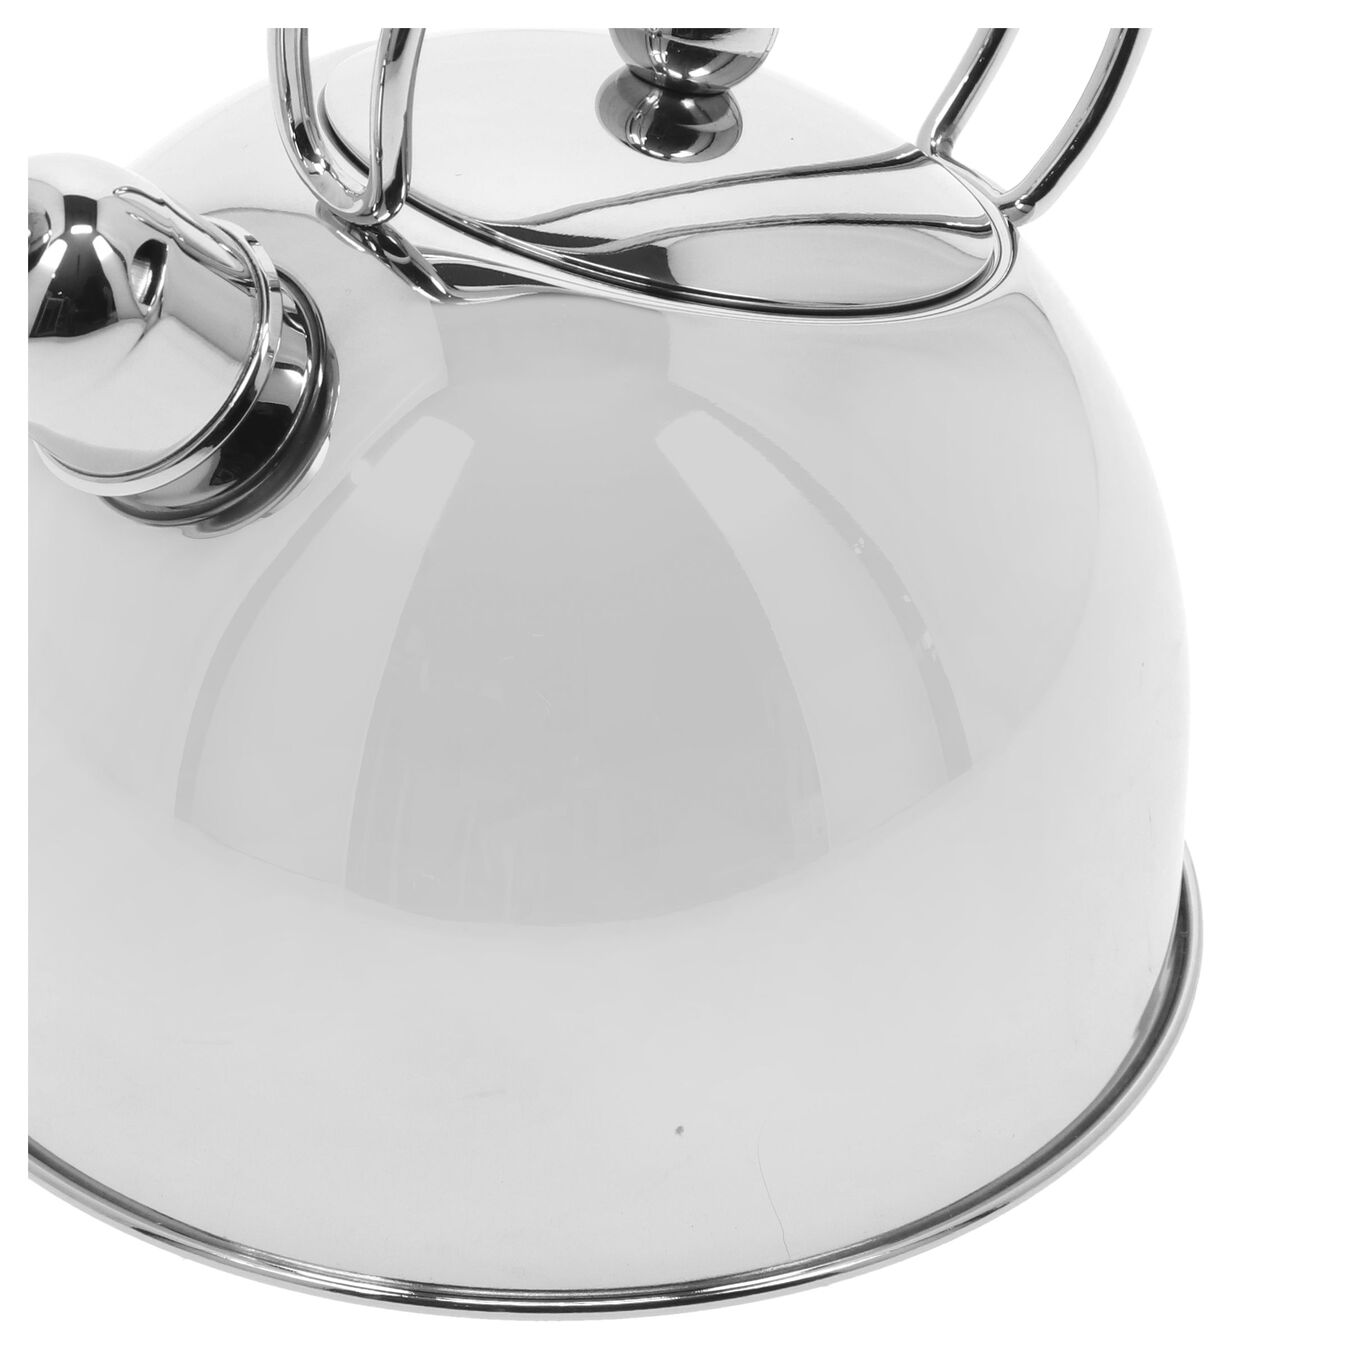 2.6 qt Whistling Tea Kettle, 18/10 Stainless Steel ,,large 7